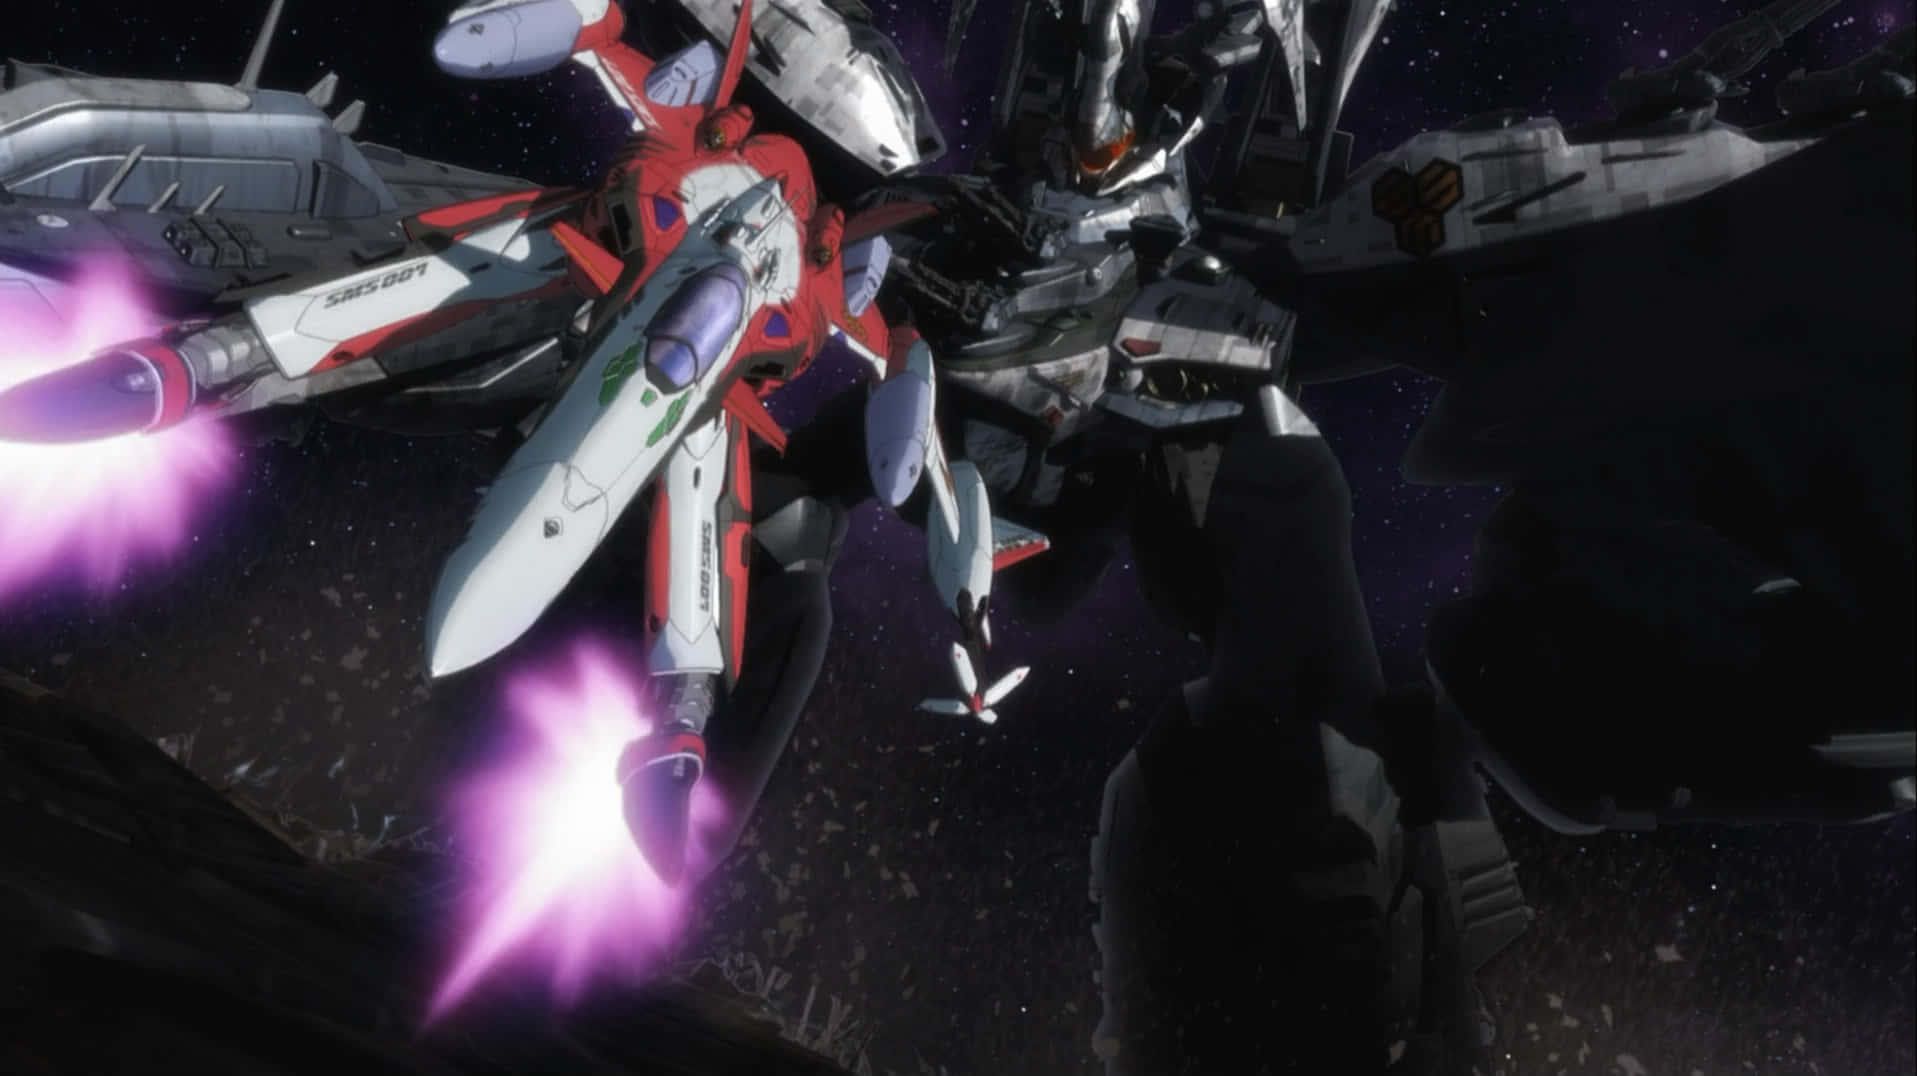 "The Power of Music and Love in Macross"